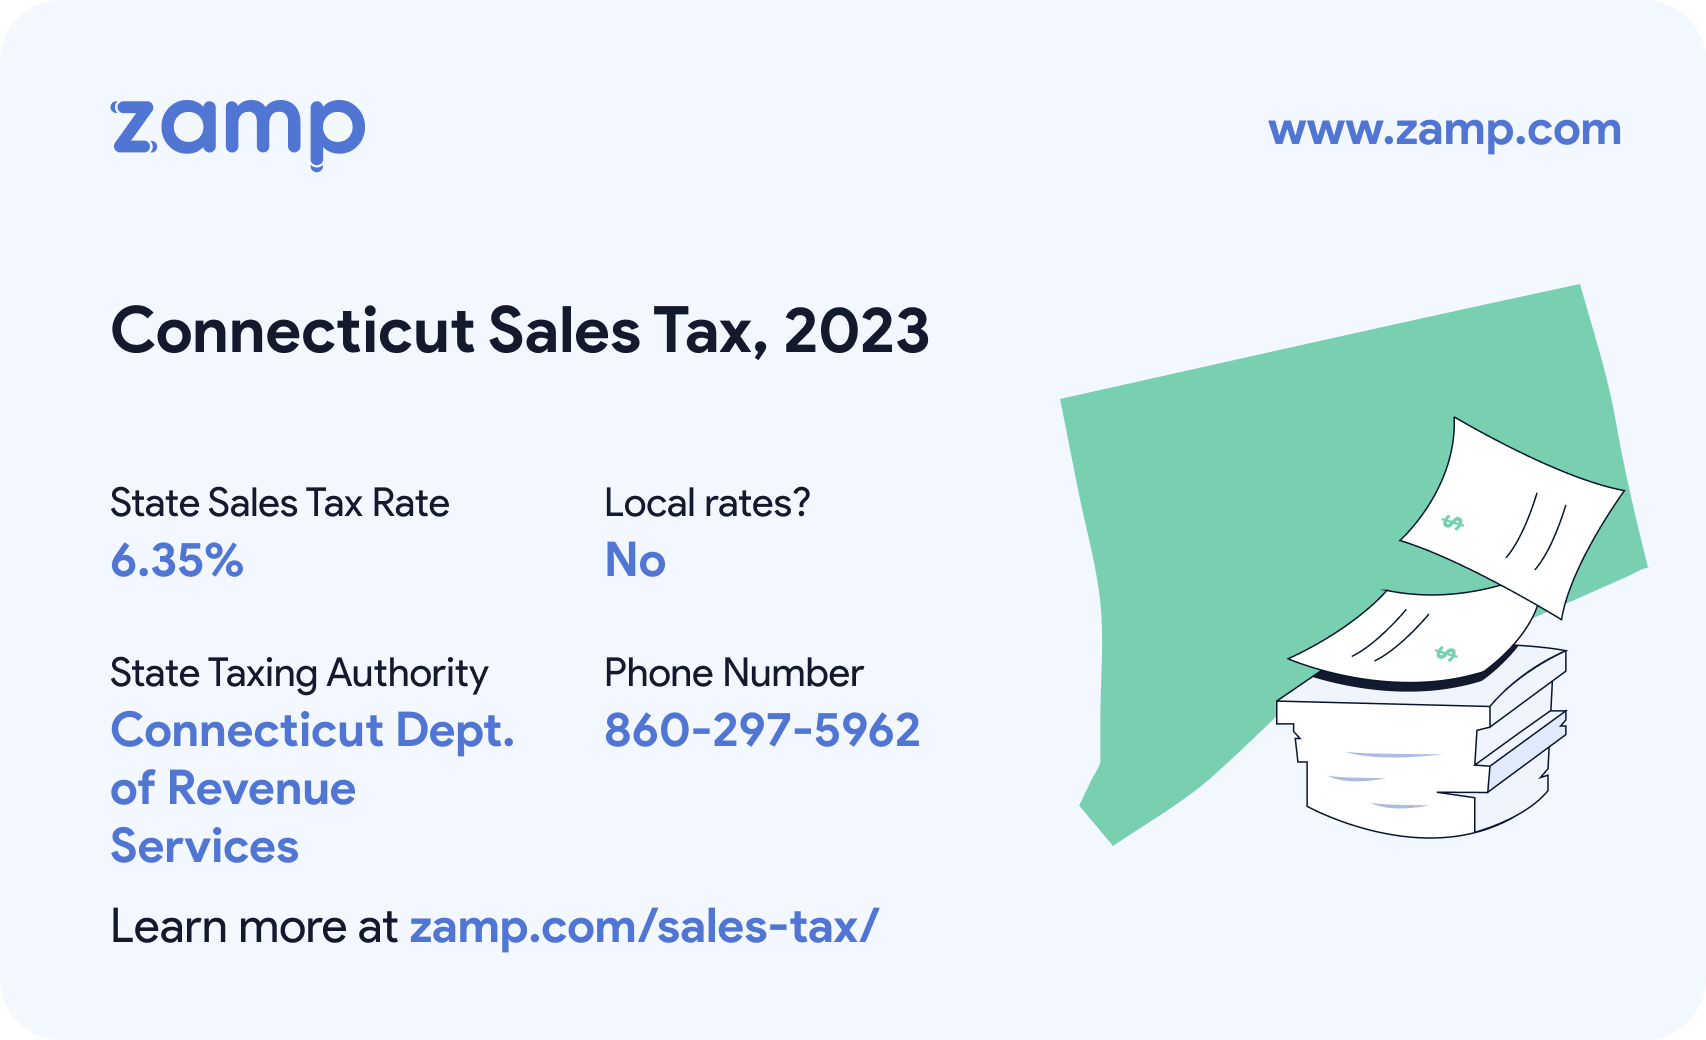 Connecticut basic sales tax info for 2023 - State sales tax rate: 6.35%, Local rates? No; State Taxing Authority: Connecticut Department of Revenue Services; and phone number 860-297-5962